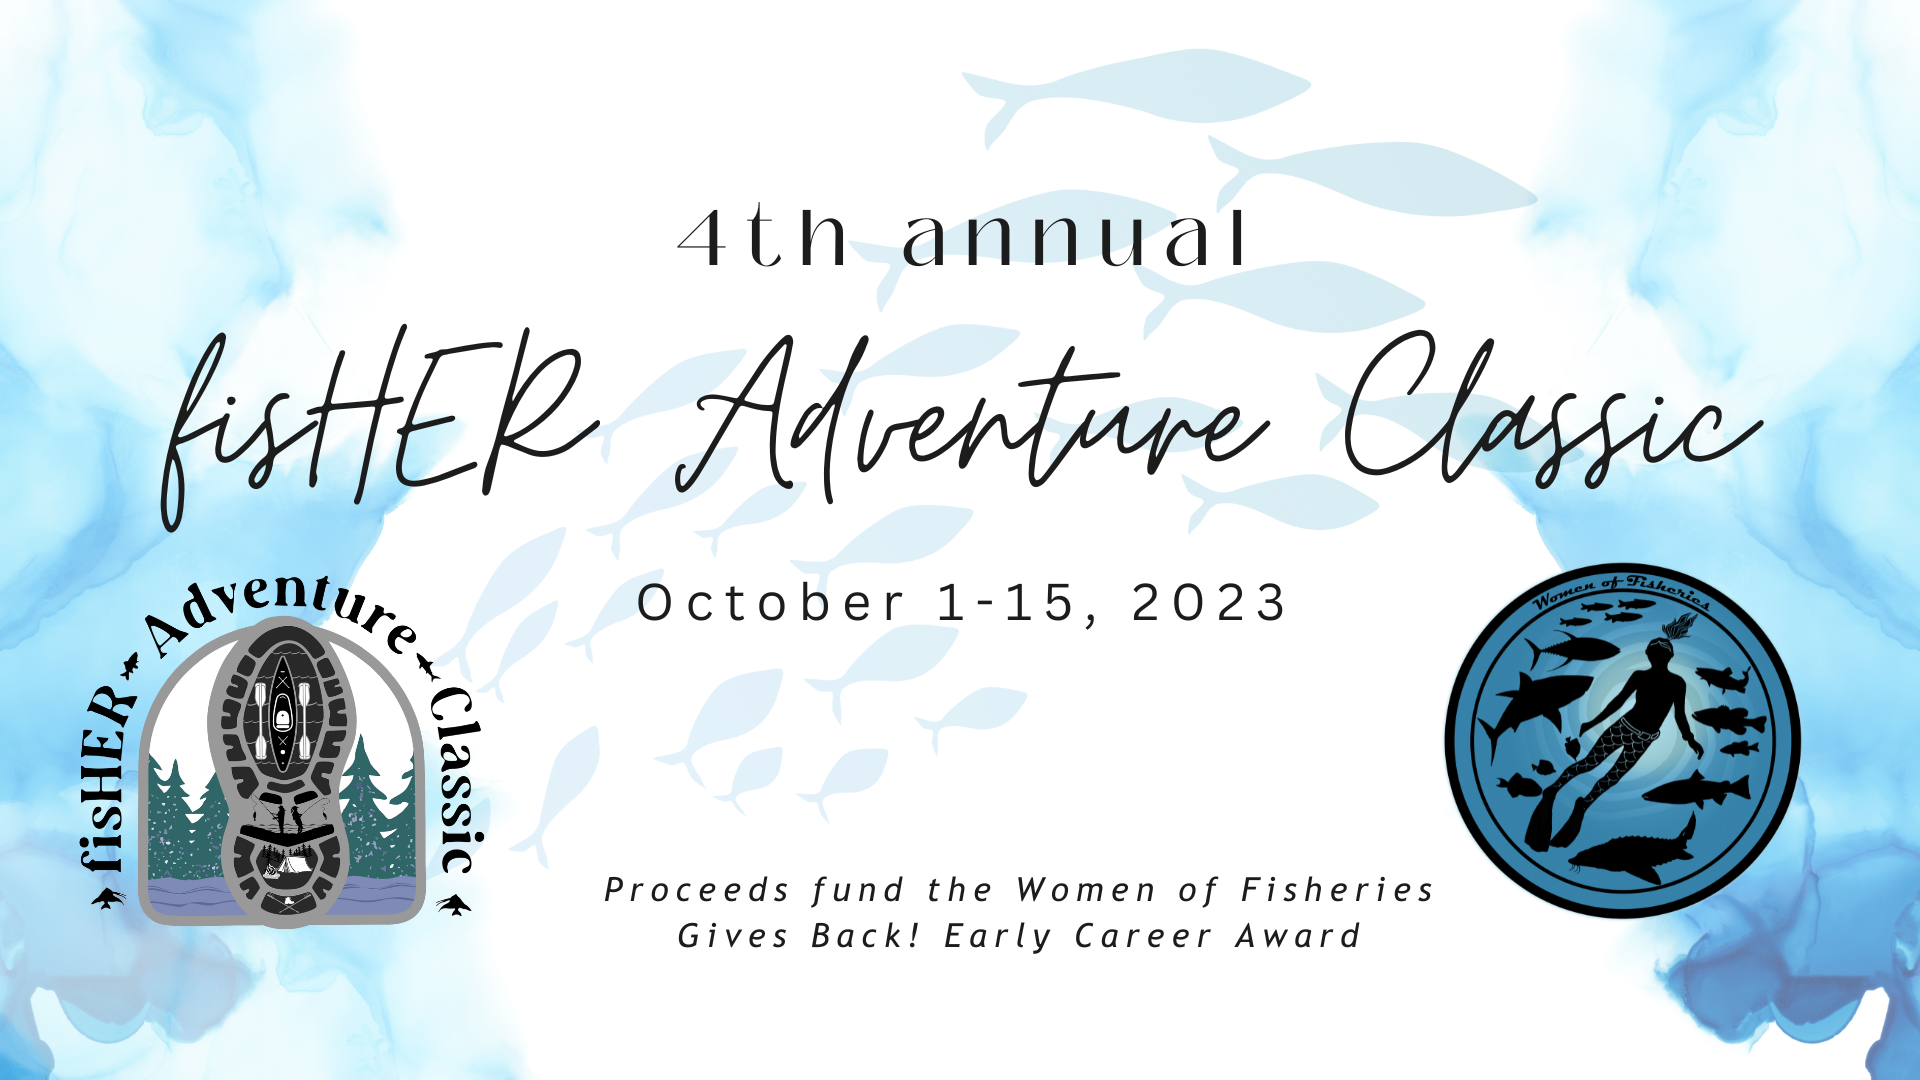 Join us for the 4th Annual fisHER Adventure Classic